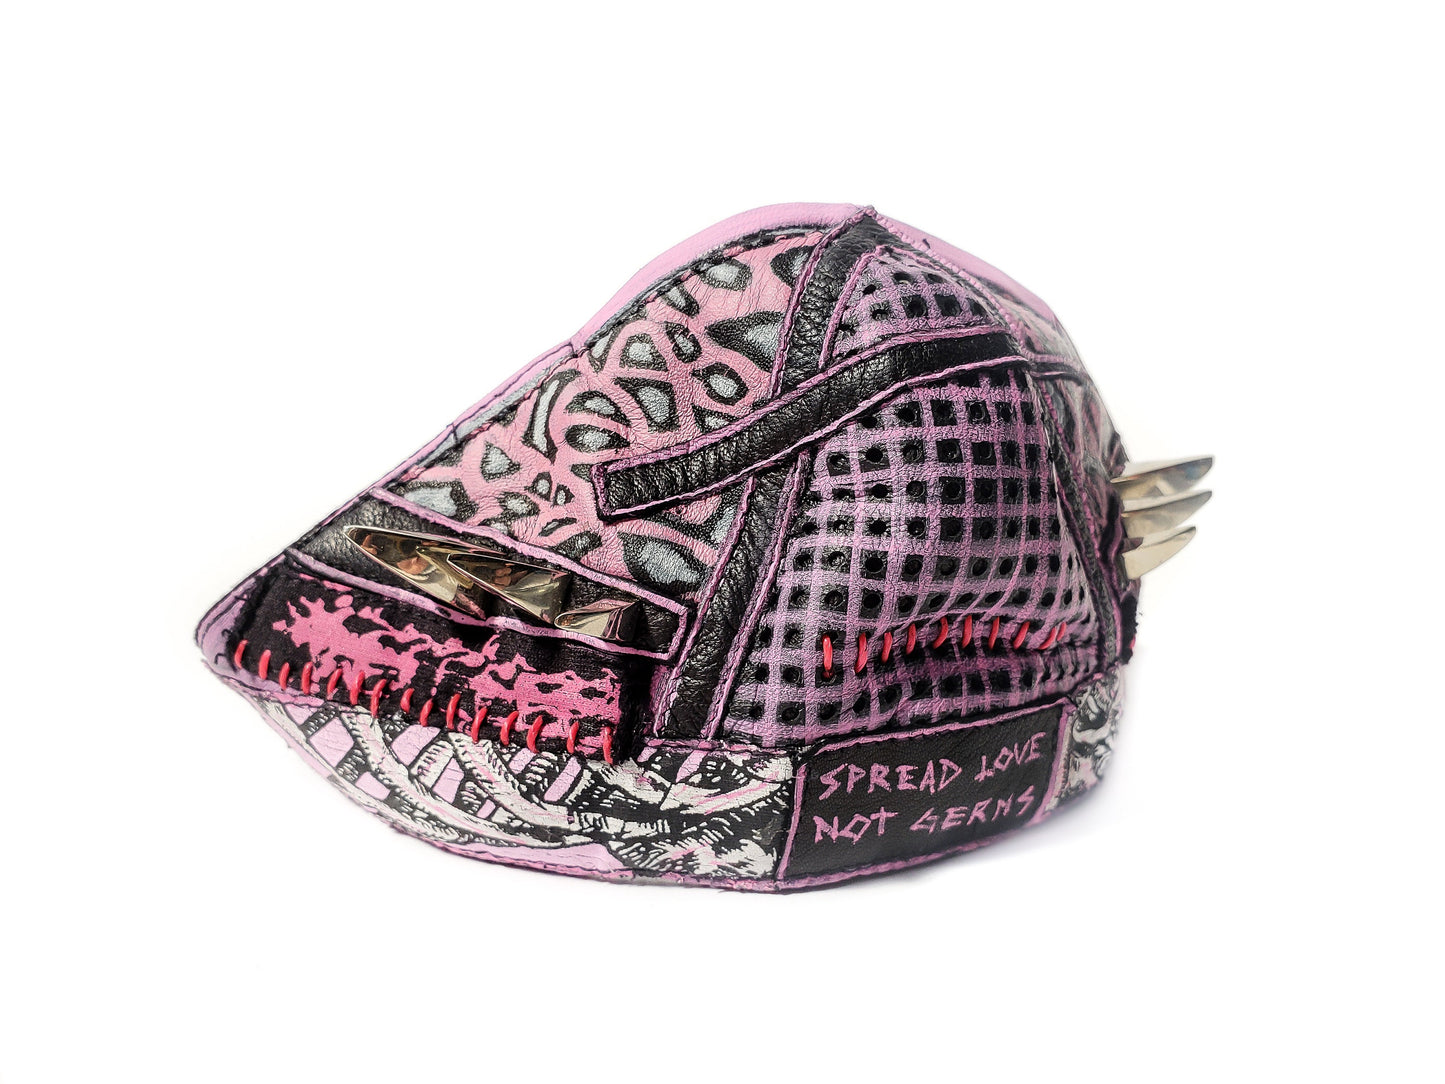 Spread Love Not Germs Pink Cyberpunk Protective Mask